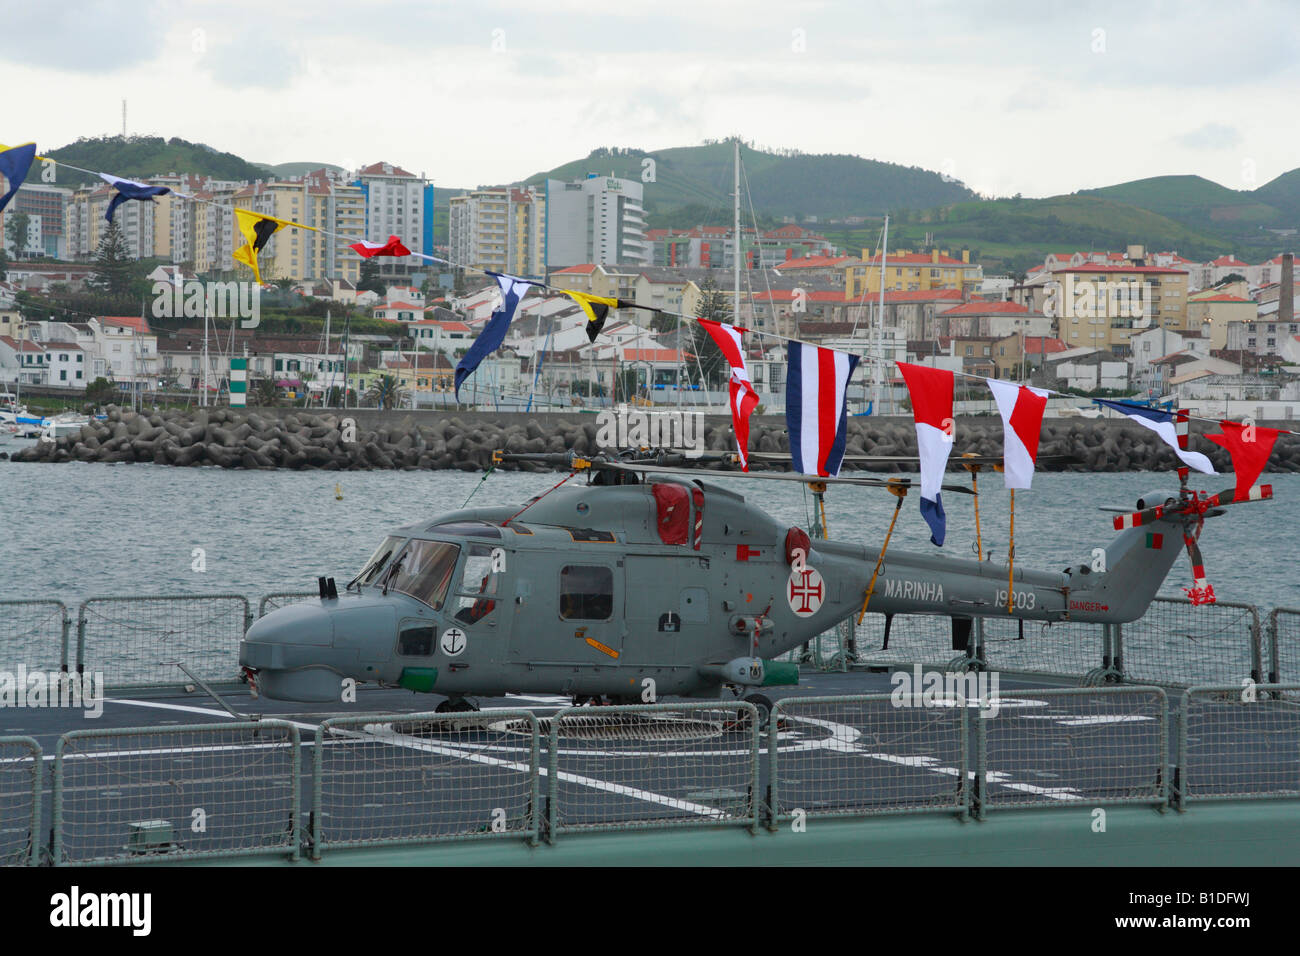 Super Lynx Mk 95 helicopter, currently being used by the Portuguese Navy. Stock Photo